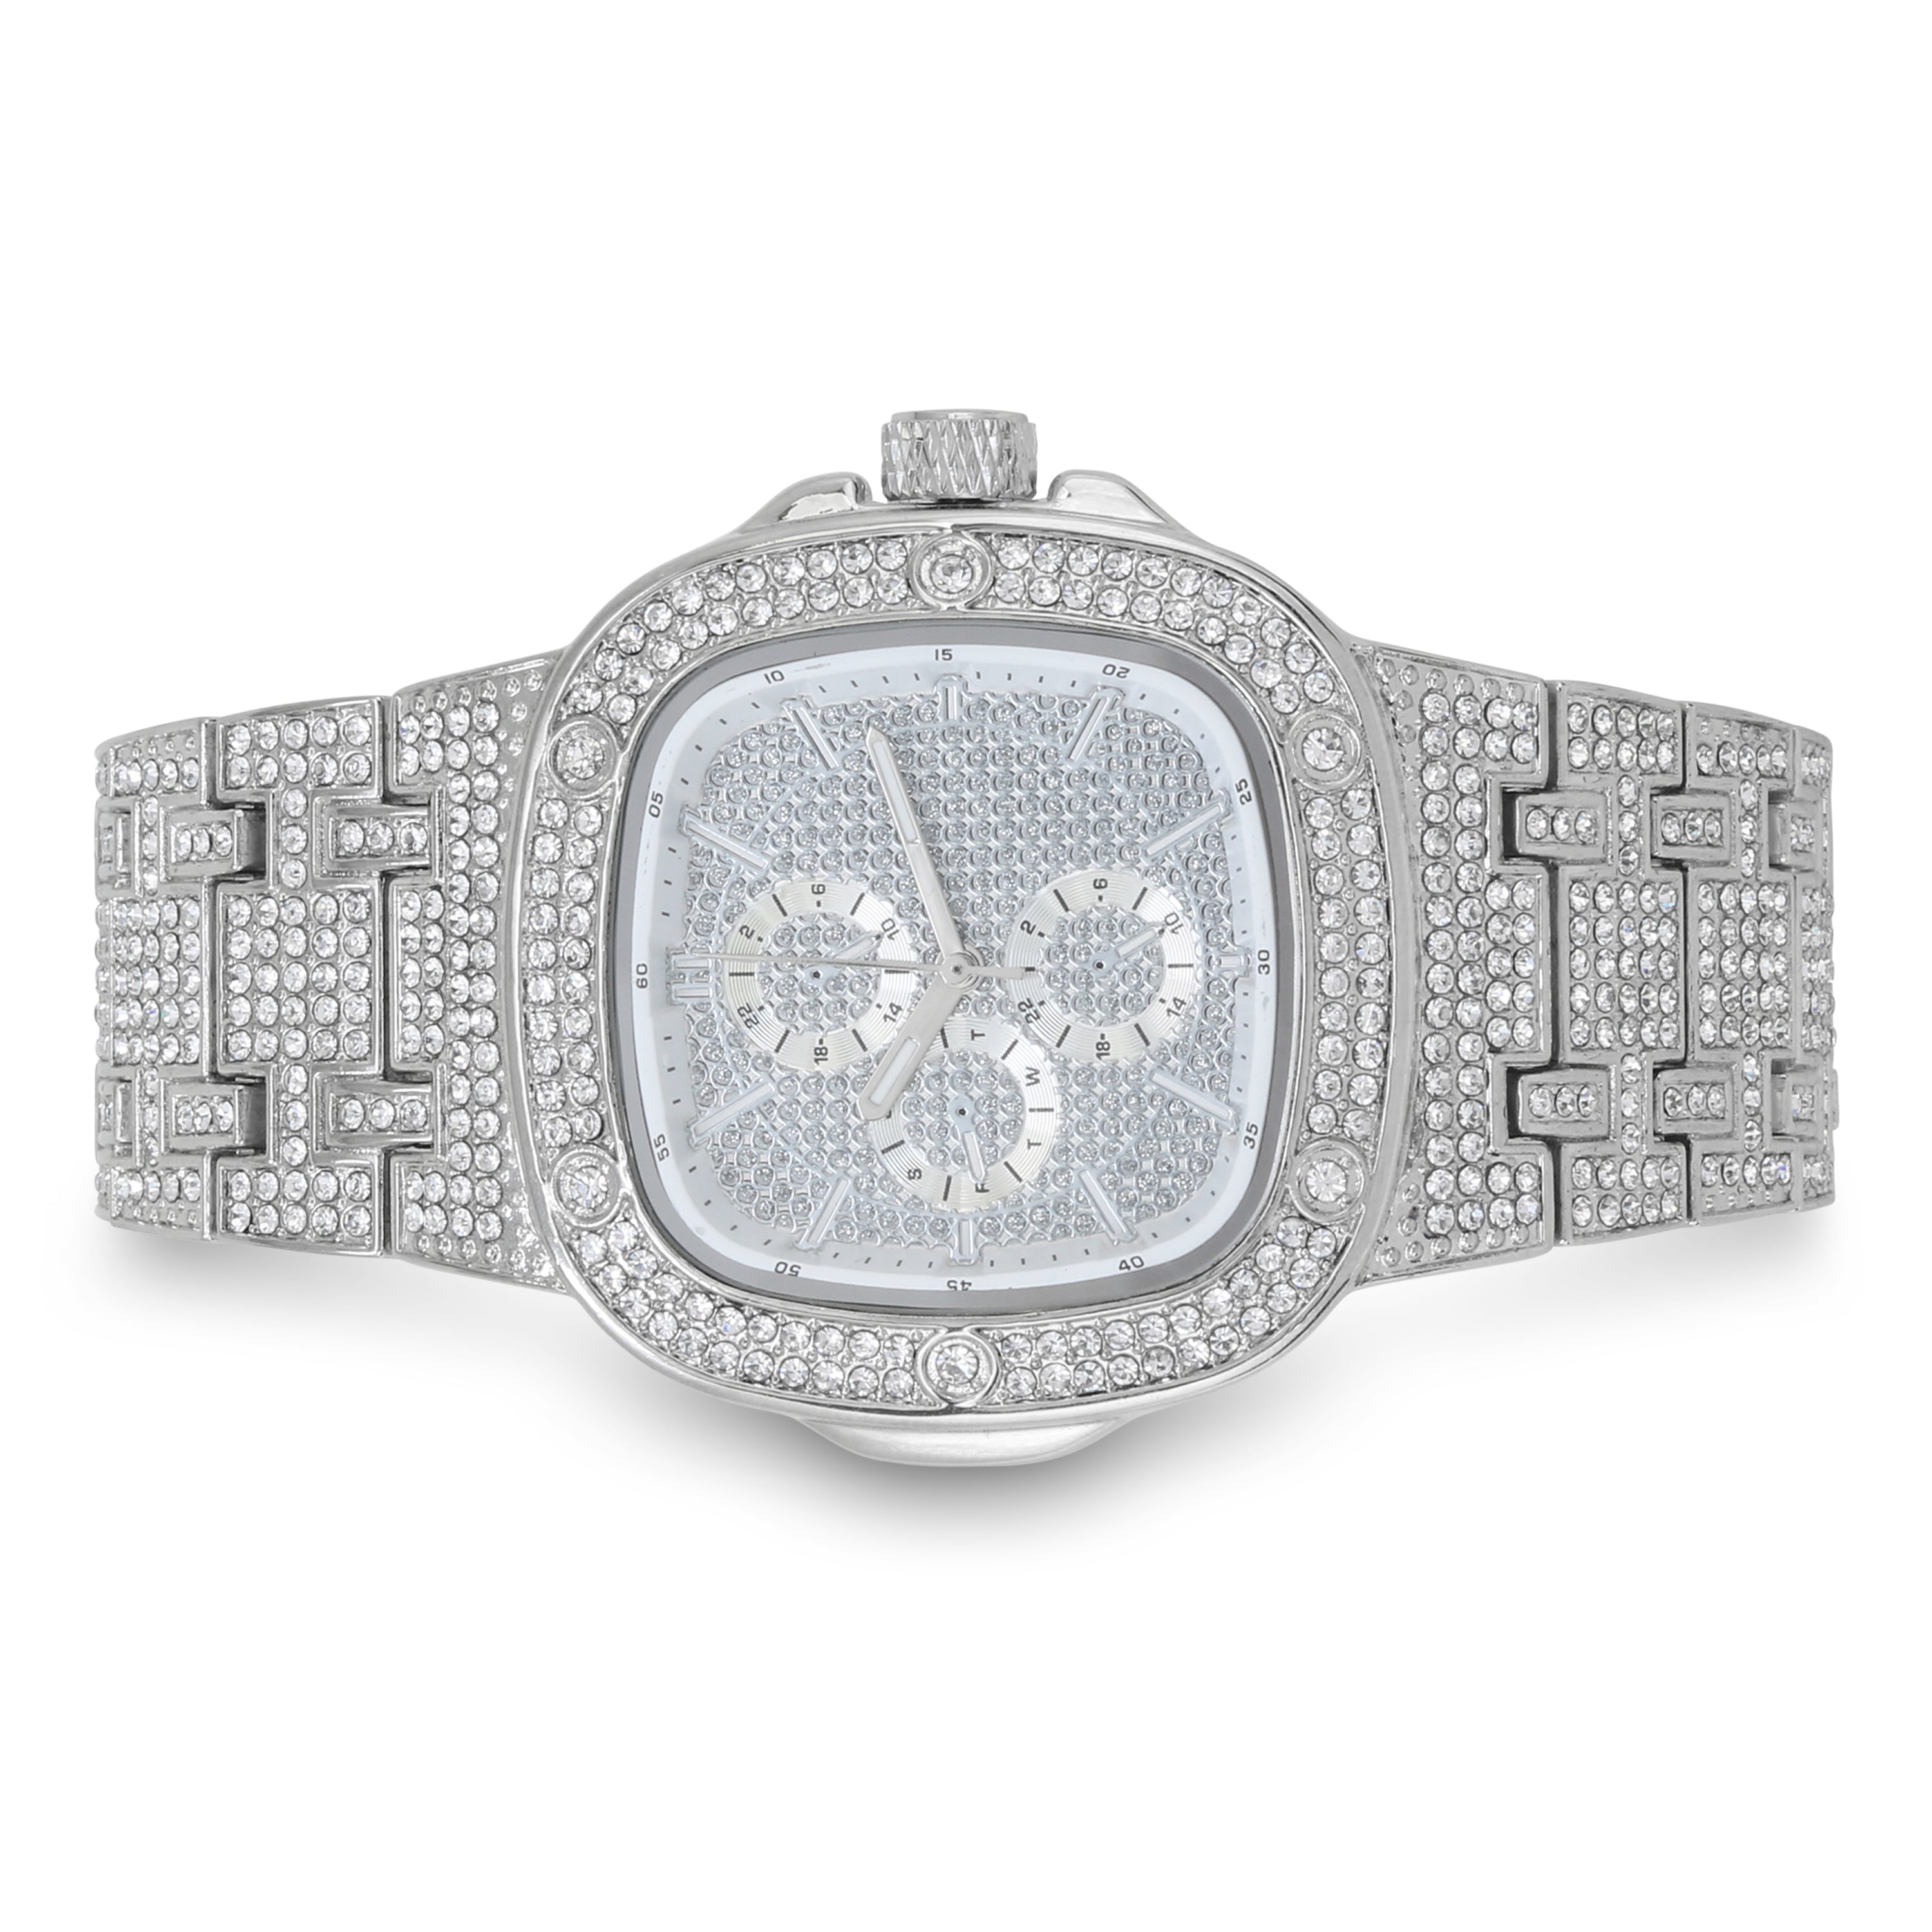 Women's Iced Out Watch 42mm Silver - Square Dial